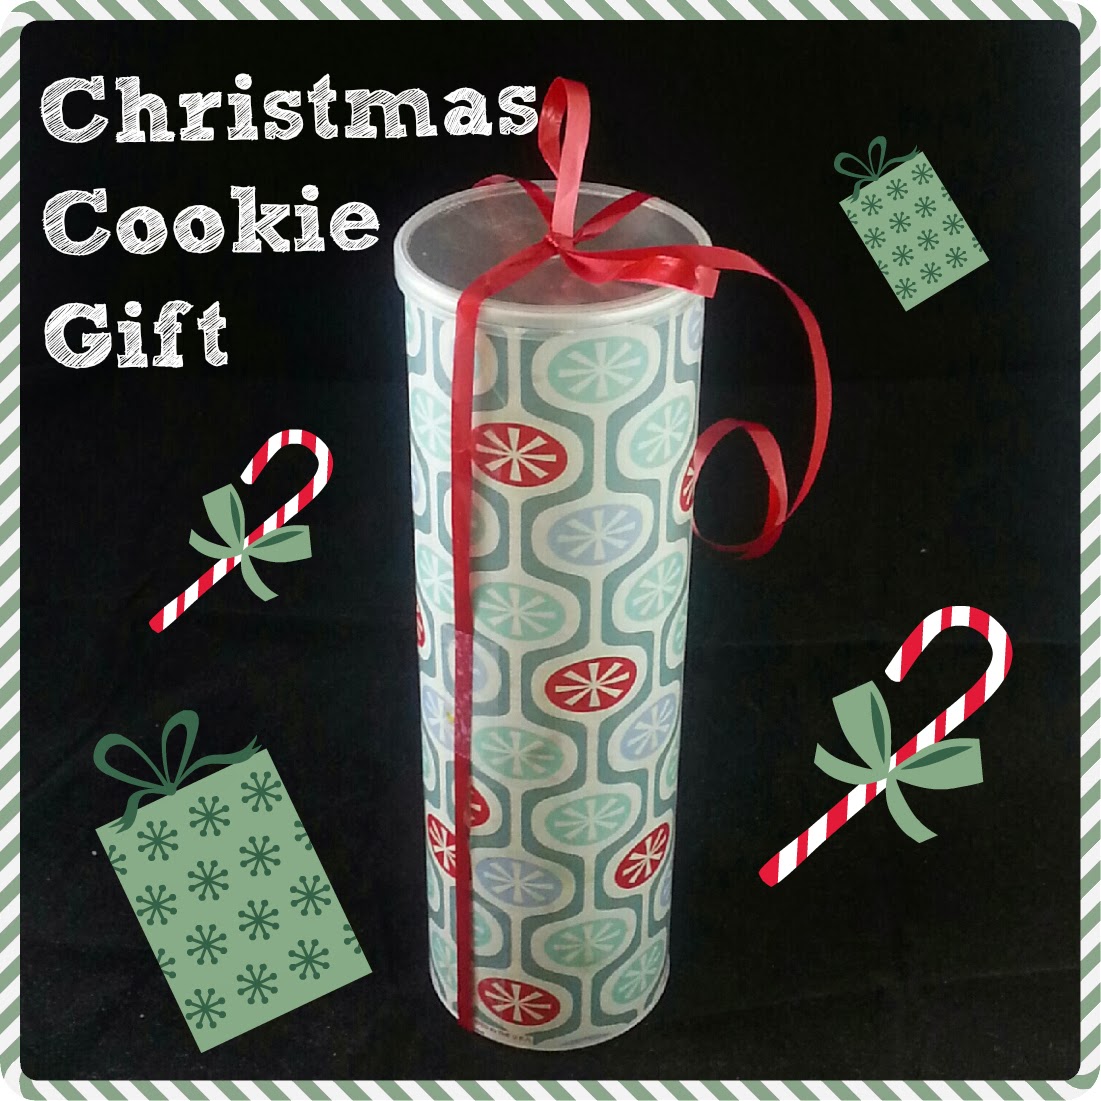 Cookie Gift for Christmas